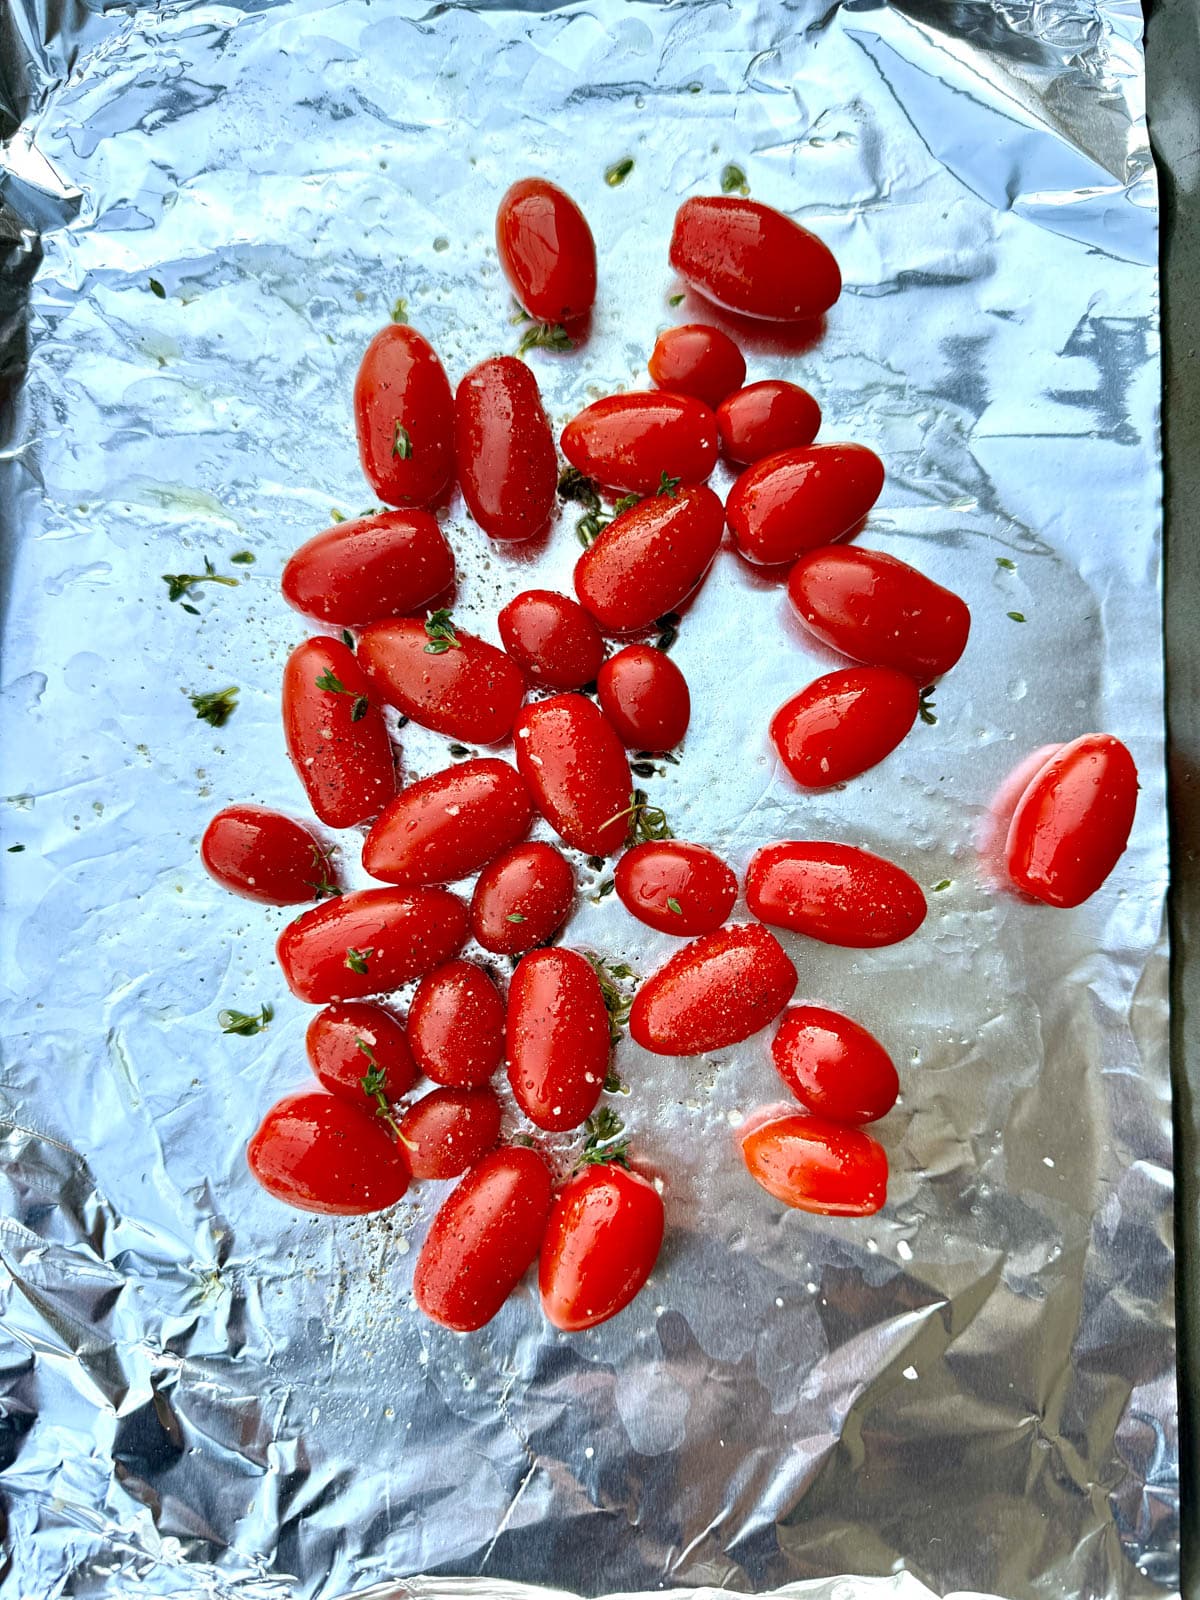 Cherry tomatoes, thyme, and oil on foil on baking sheet.